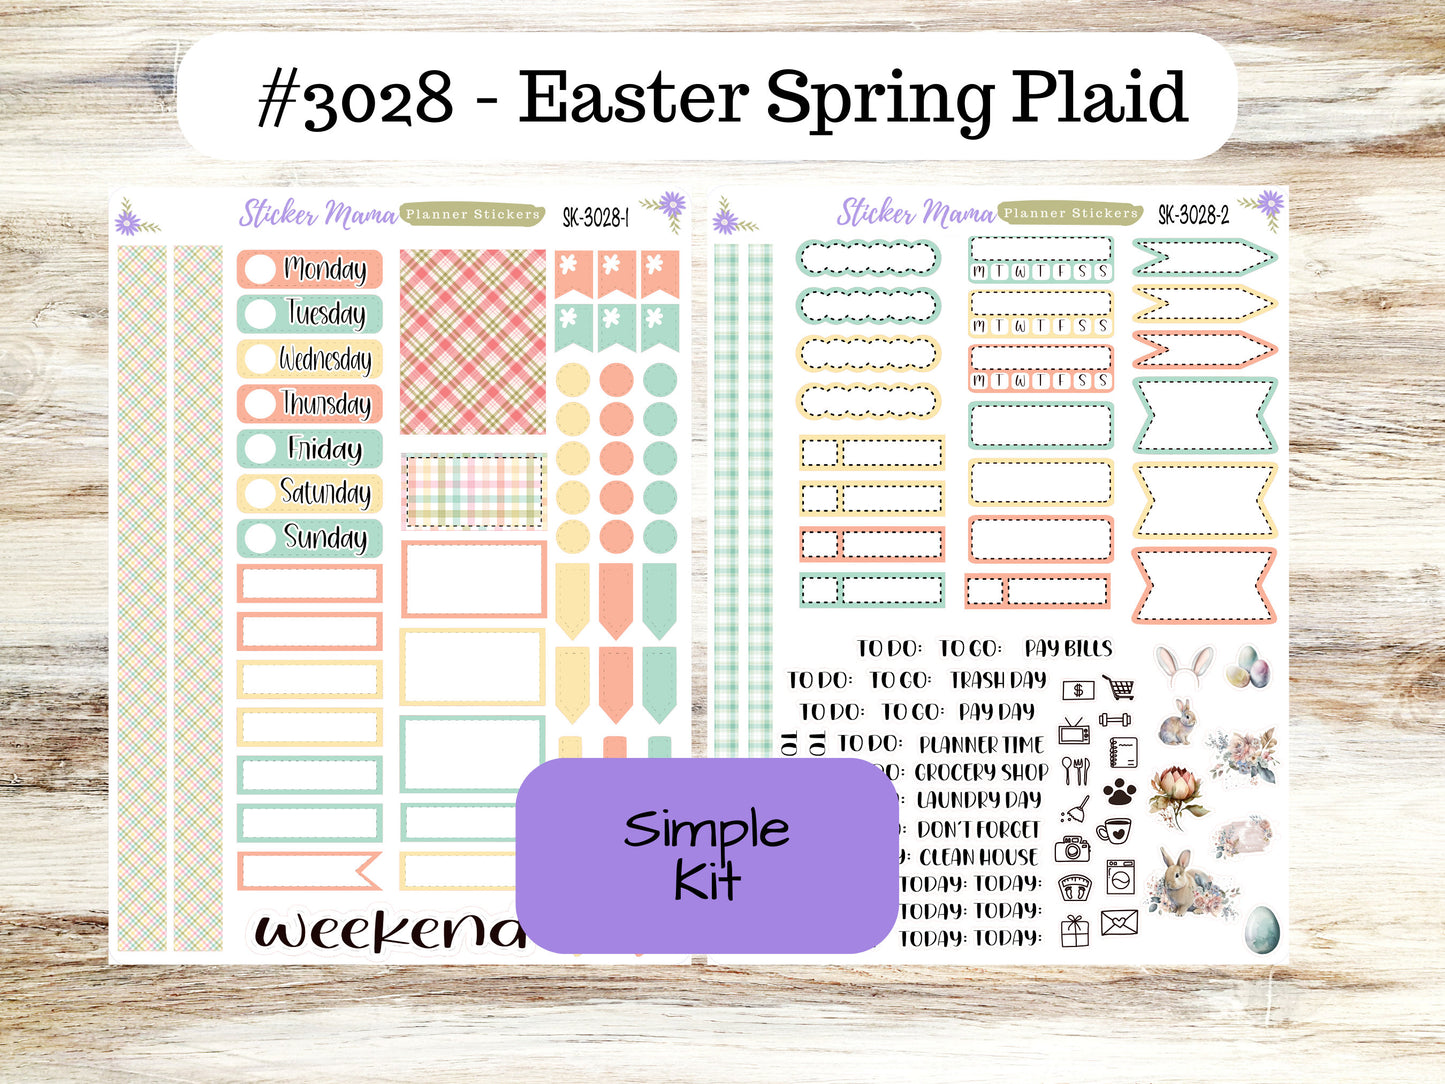 SIMPLE KIT  || #3028 || Easter Spring Plaid  || Any Kind Planner || Planner Stickers || Planner Stickers